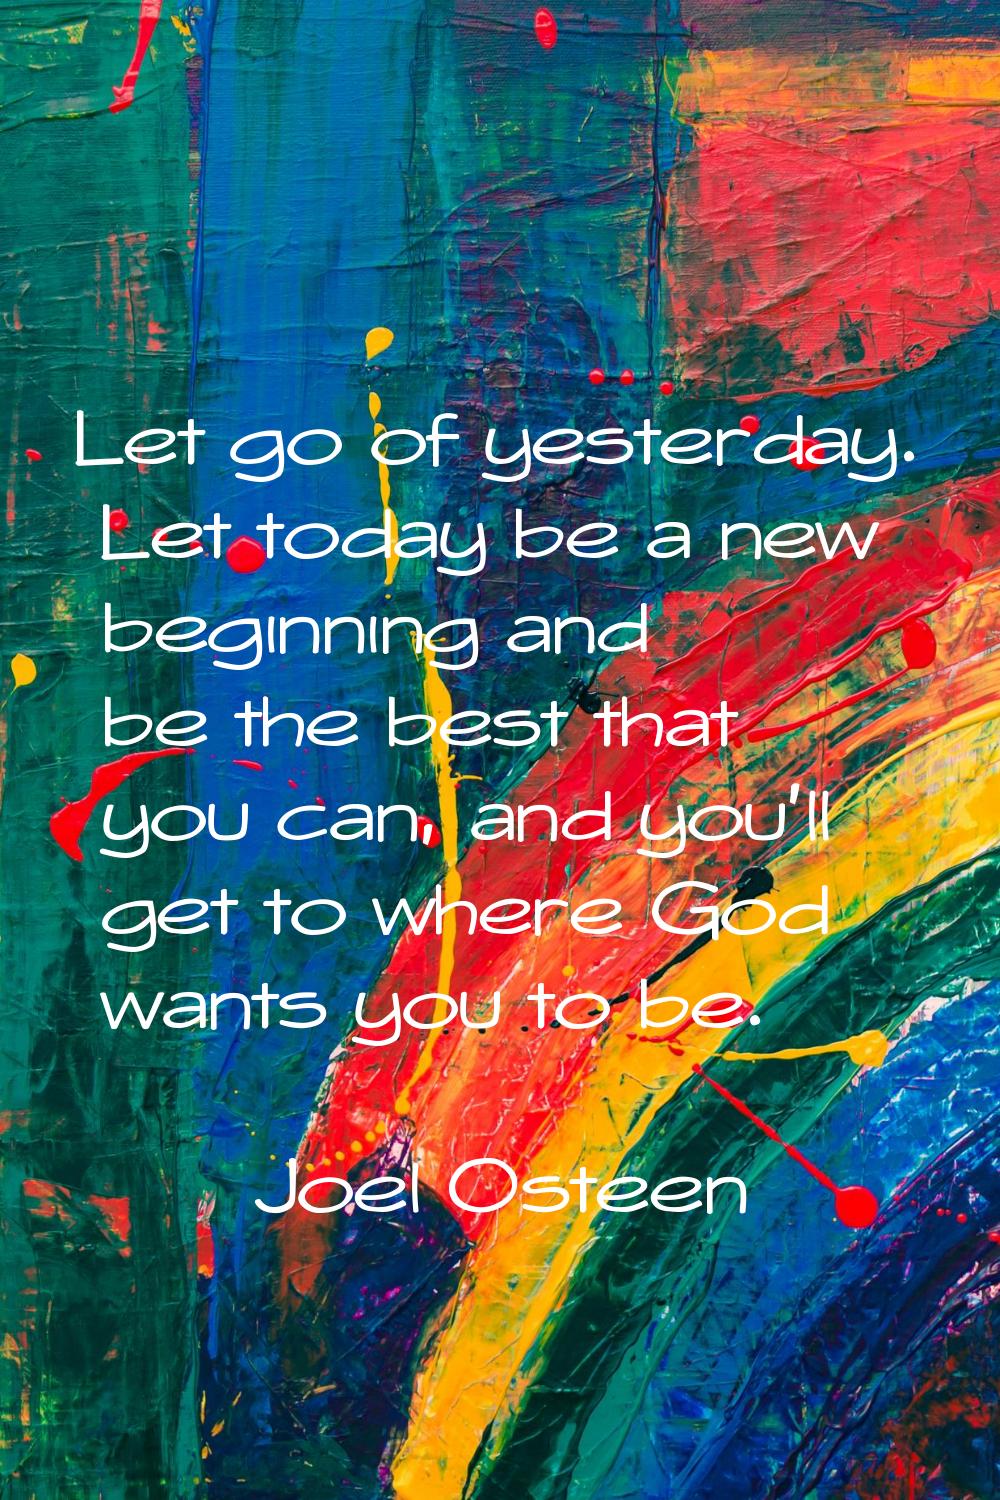 Let go of yesterday. Let today be a new beginning and be the best that you can, and you'll get to w